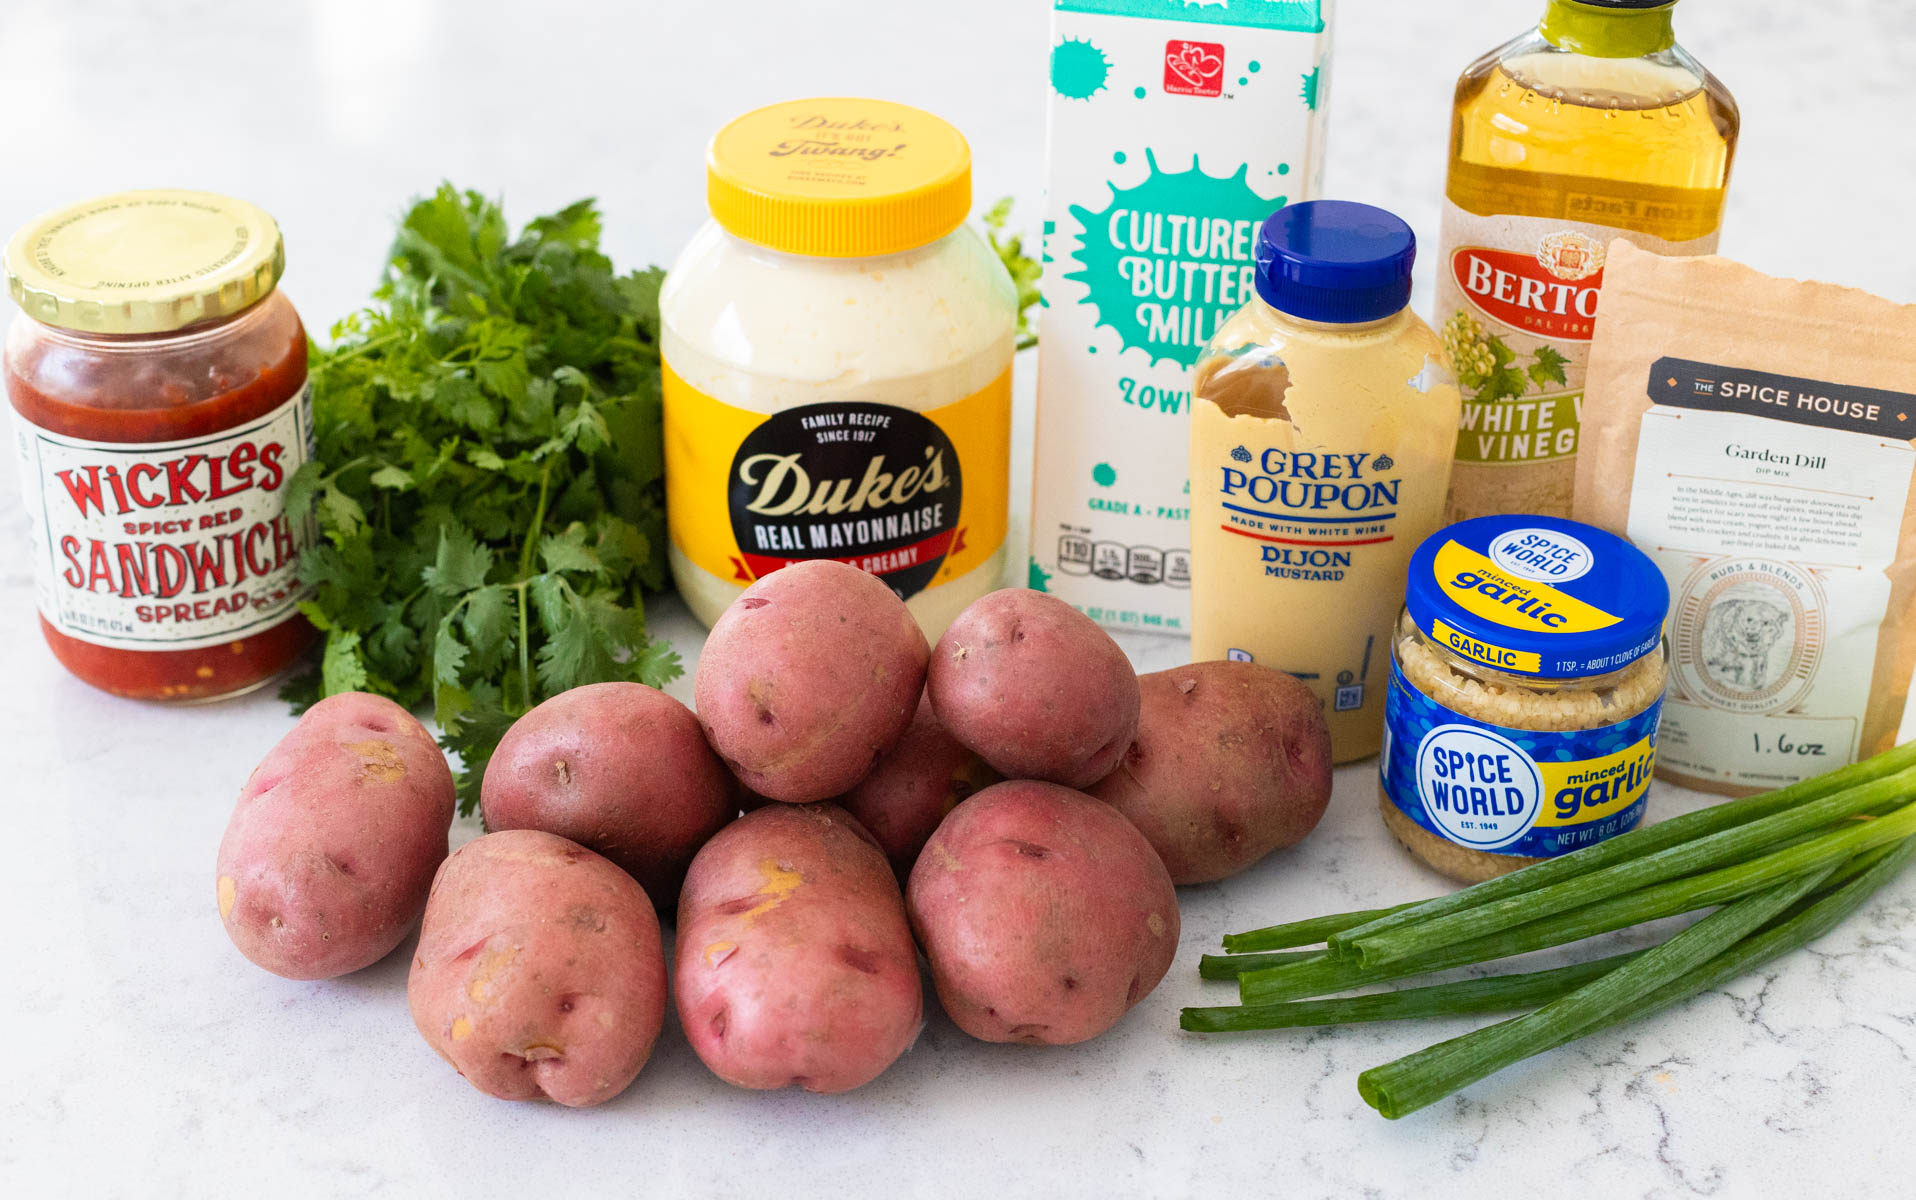 The ingredients to make the potato salad are on the kitchen counter.